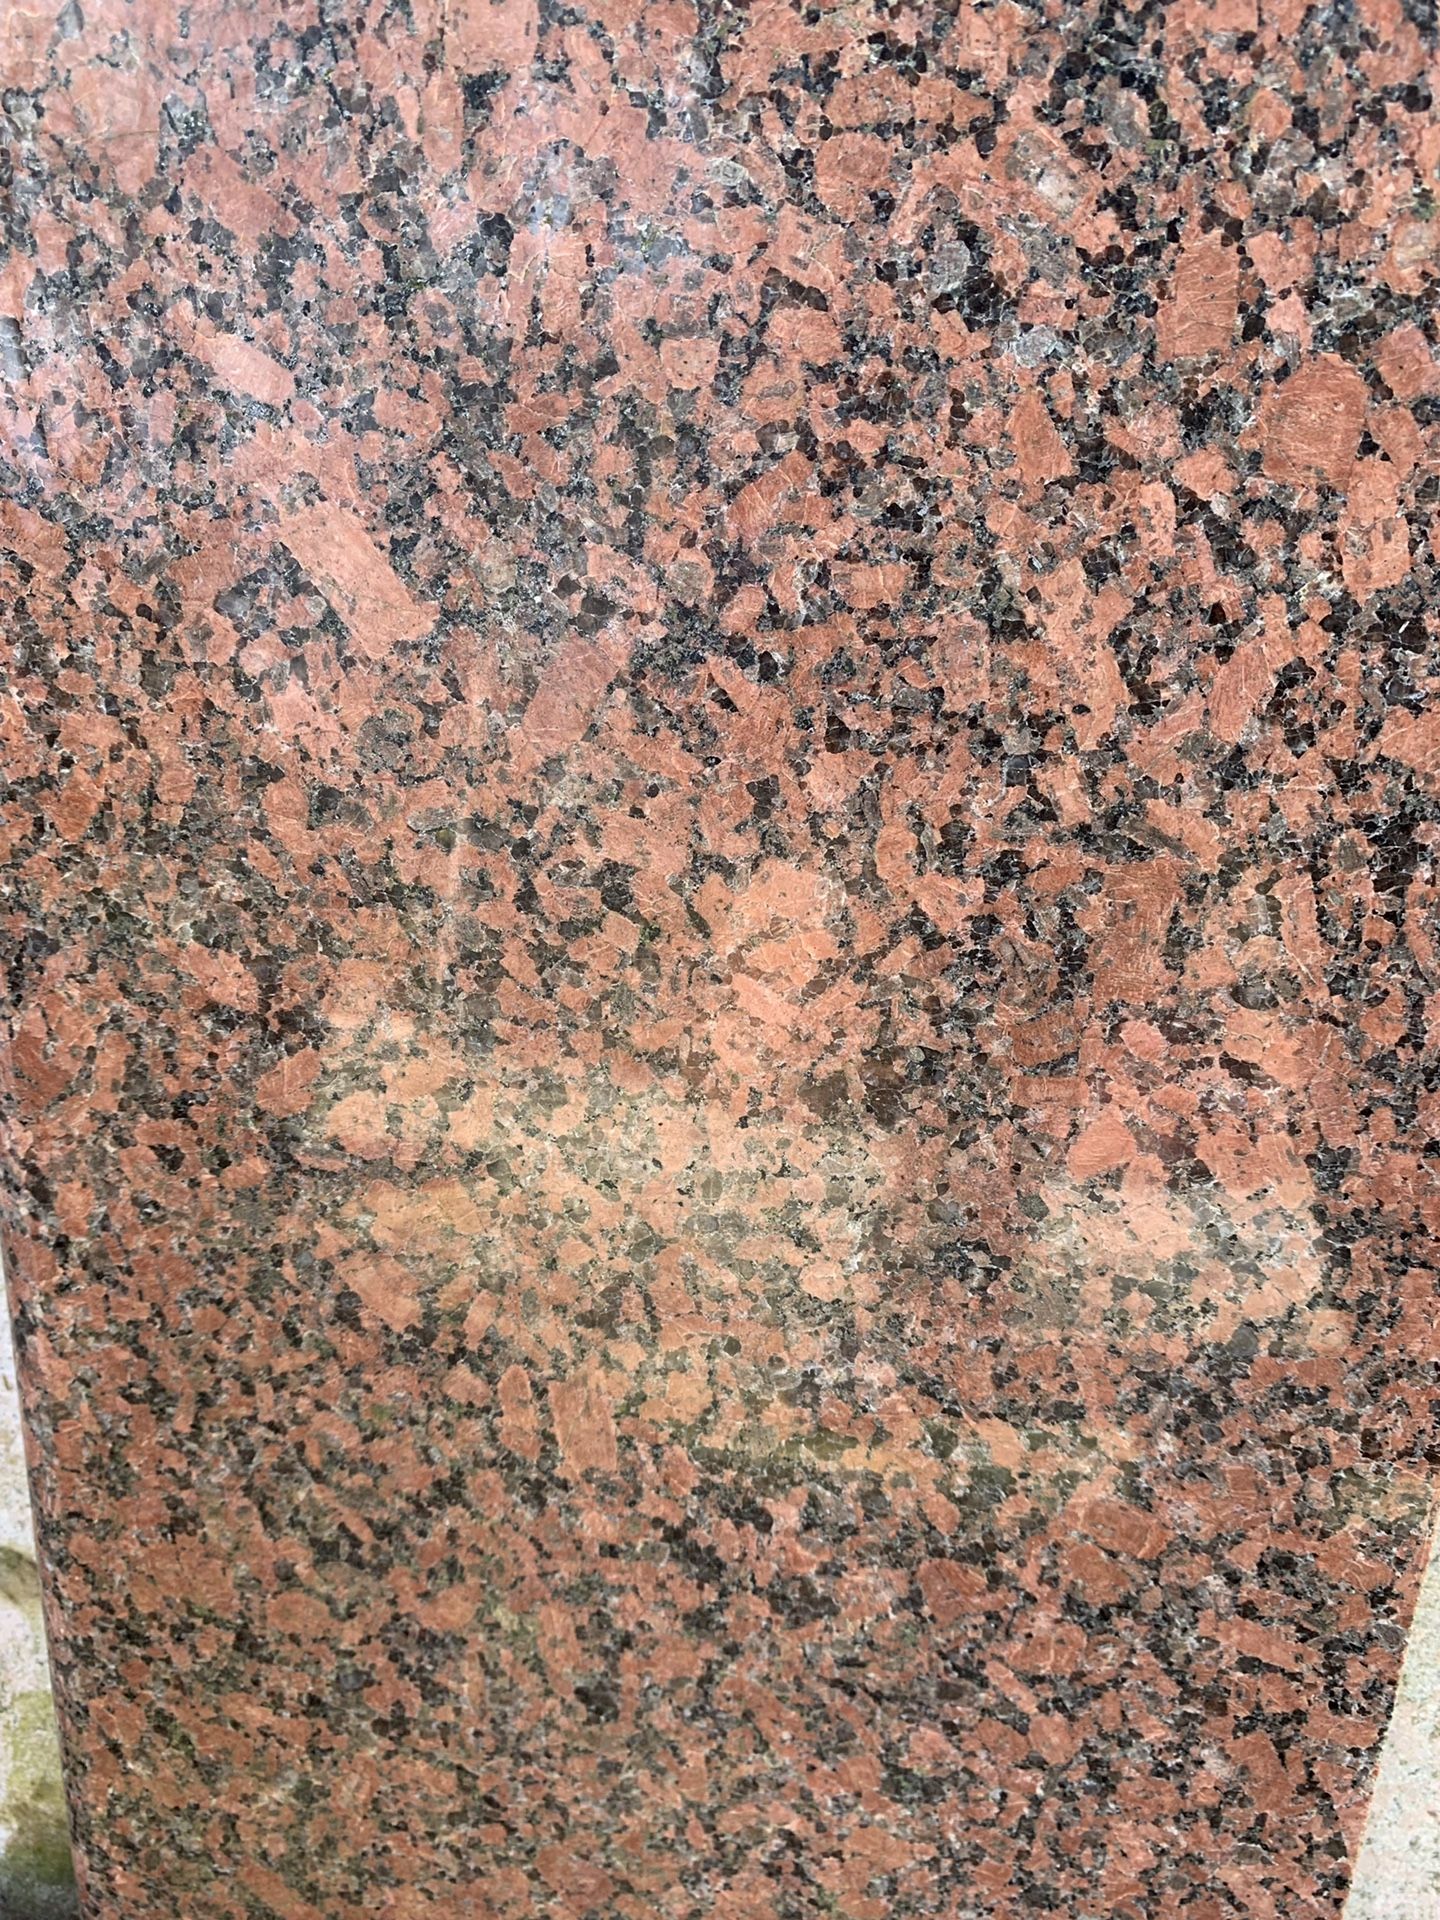 Granite slabs and trim from a kitchen remodel, excellent condition.$100 or best offer, must pick up. See measurements below.